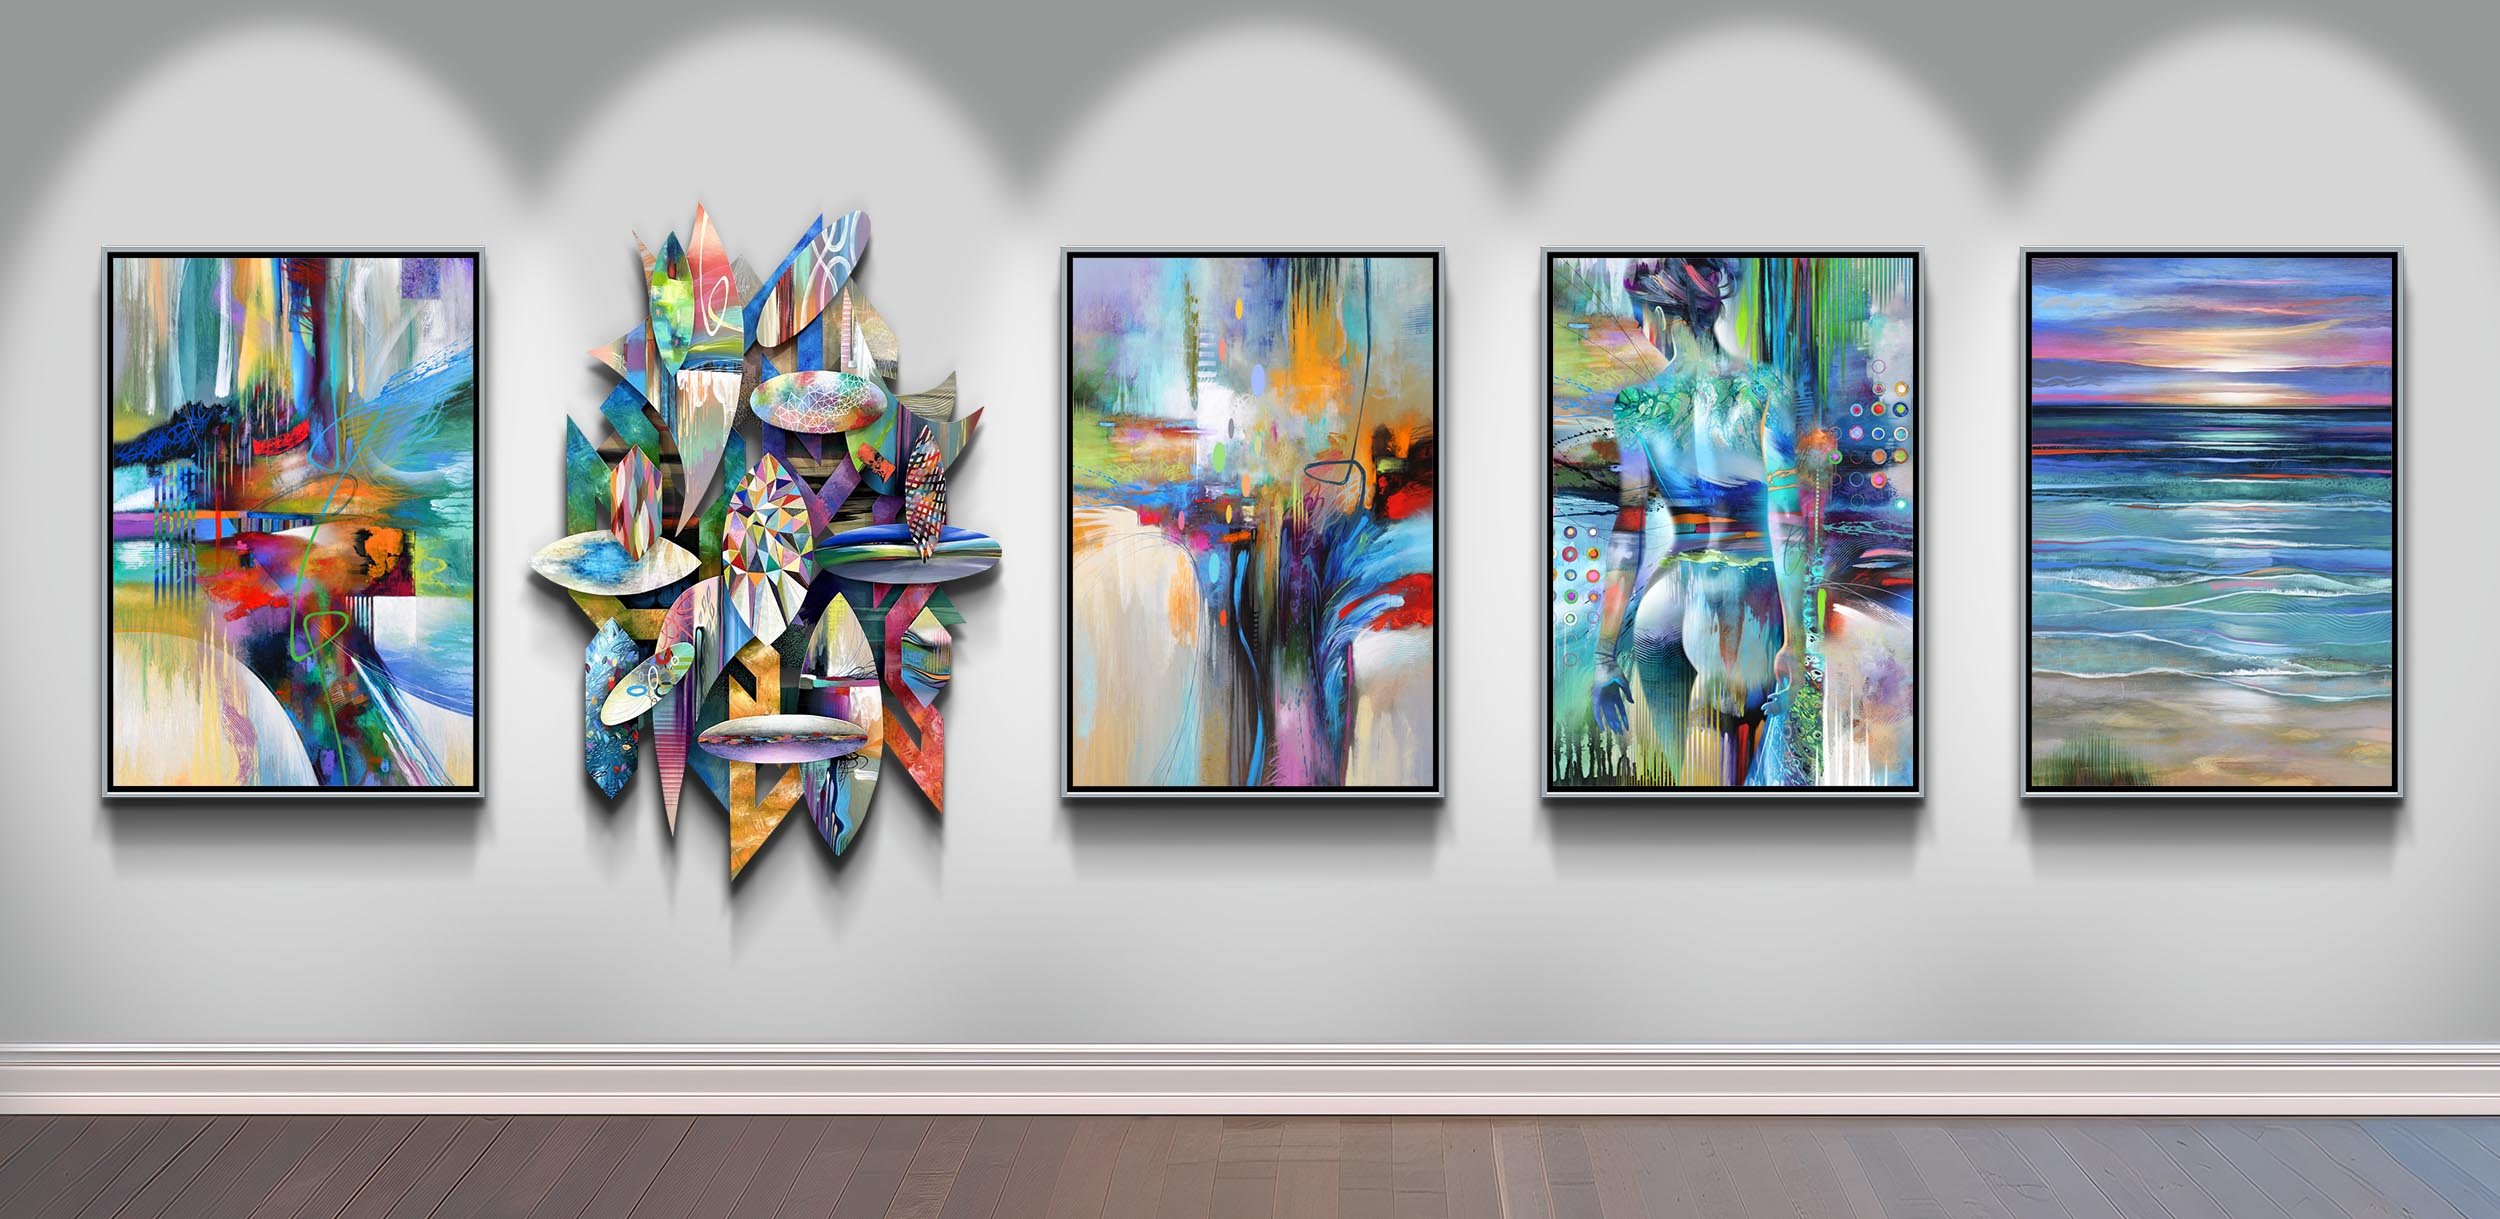 2_Art Gallery Naples FL, large abstract art, Fifth Avenue Art, living room artwork naples, large abstract paintings, local artist Timothy Parker Naples Florida Artwork, Fifth avenue south art, large wall art.jpg